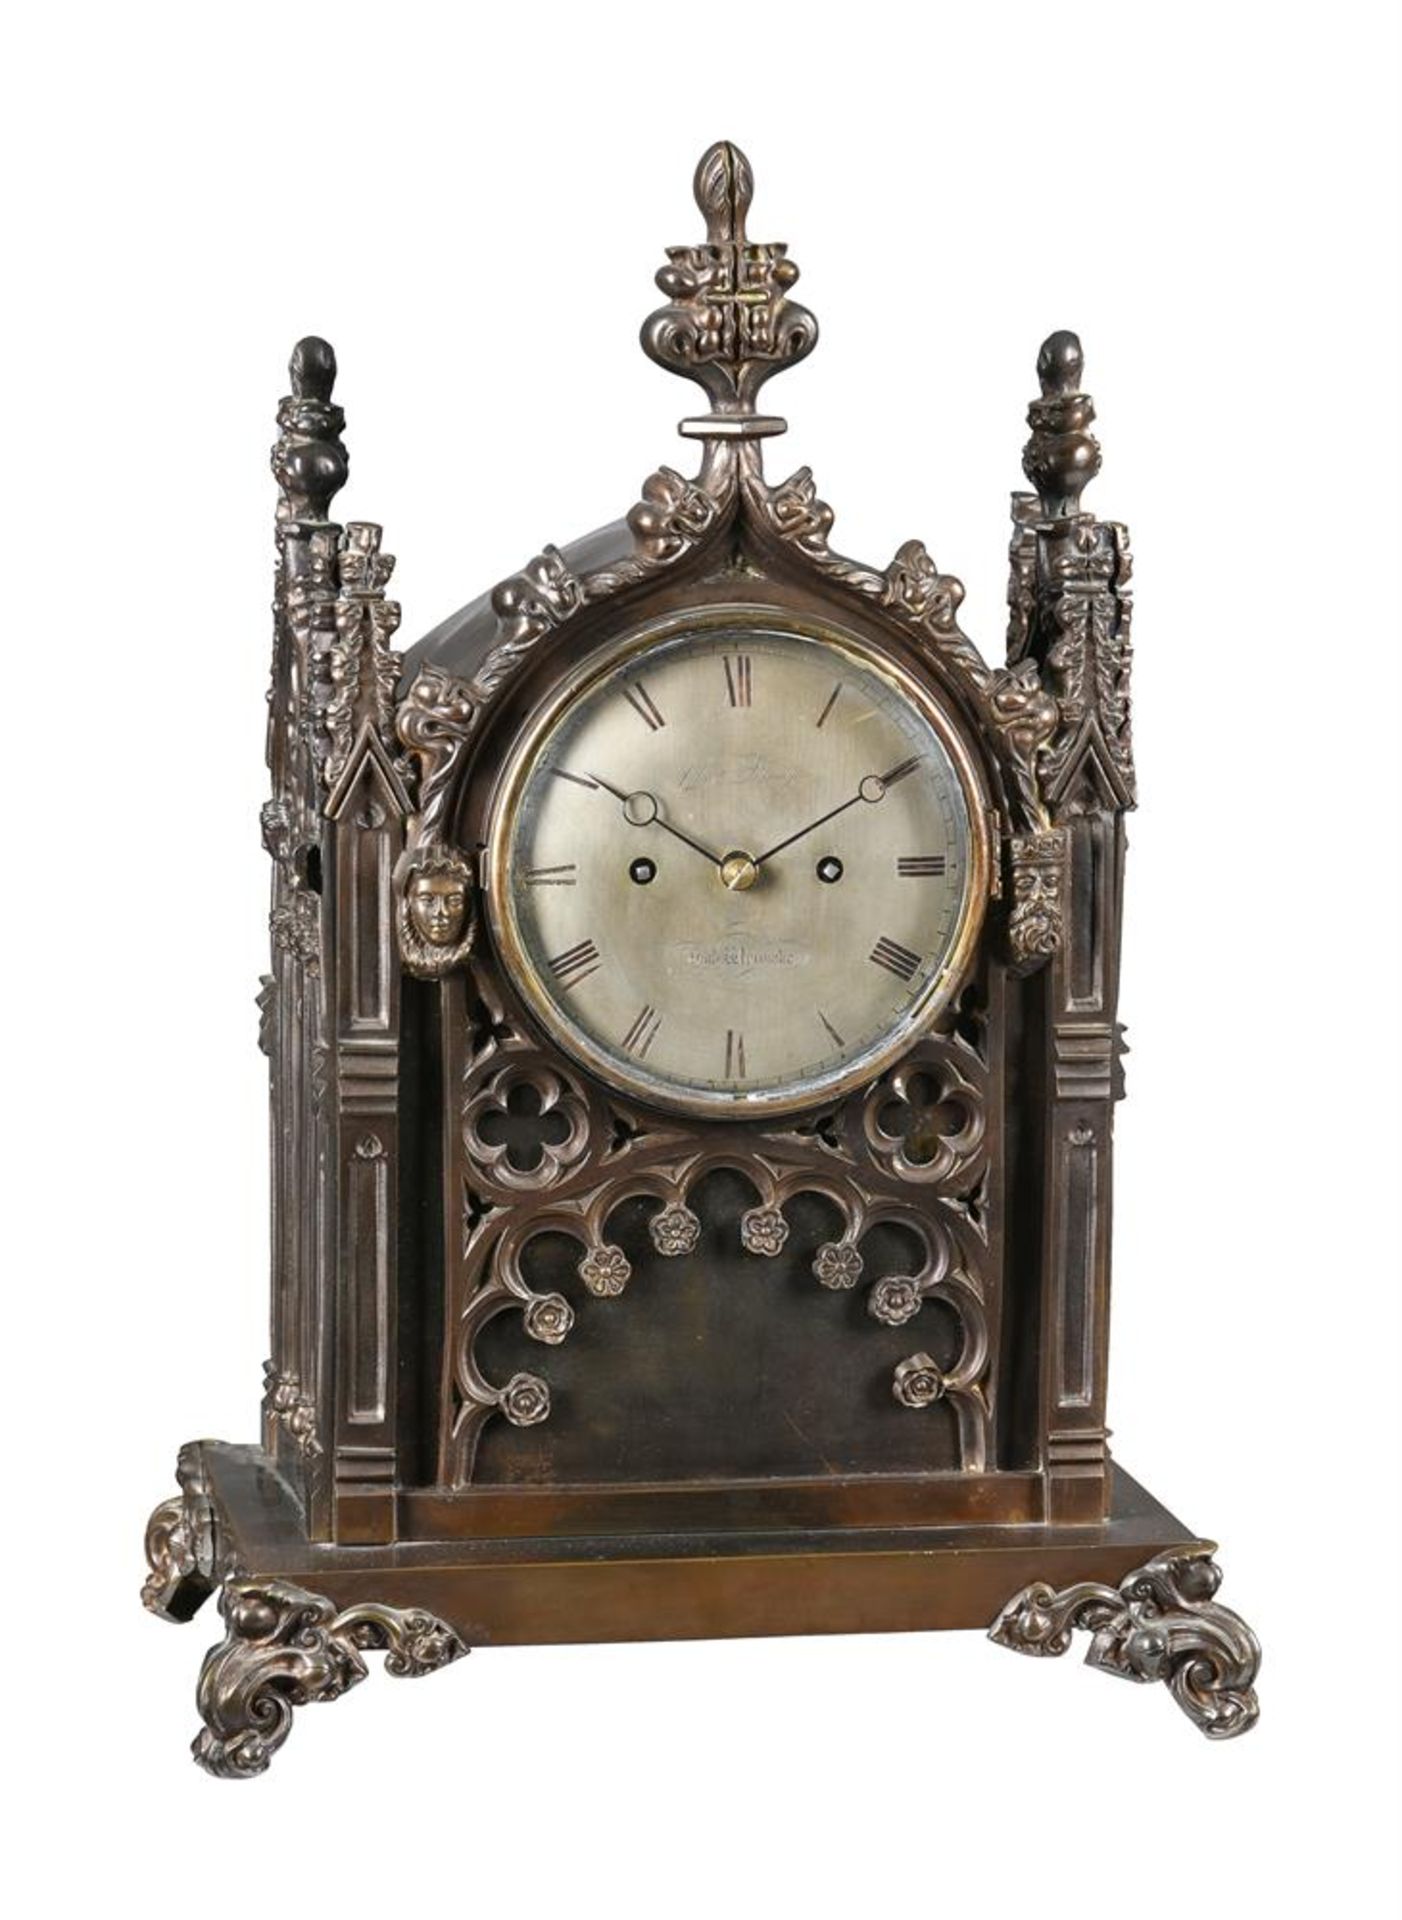 A WILLIAM IV/EARLY VICTORIAN PATINATED BRONZE GOTHIC REVIVAL BRACKET CLOCK